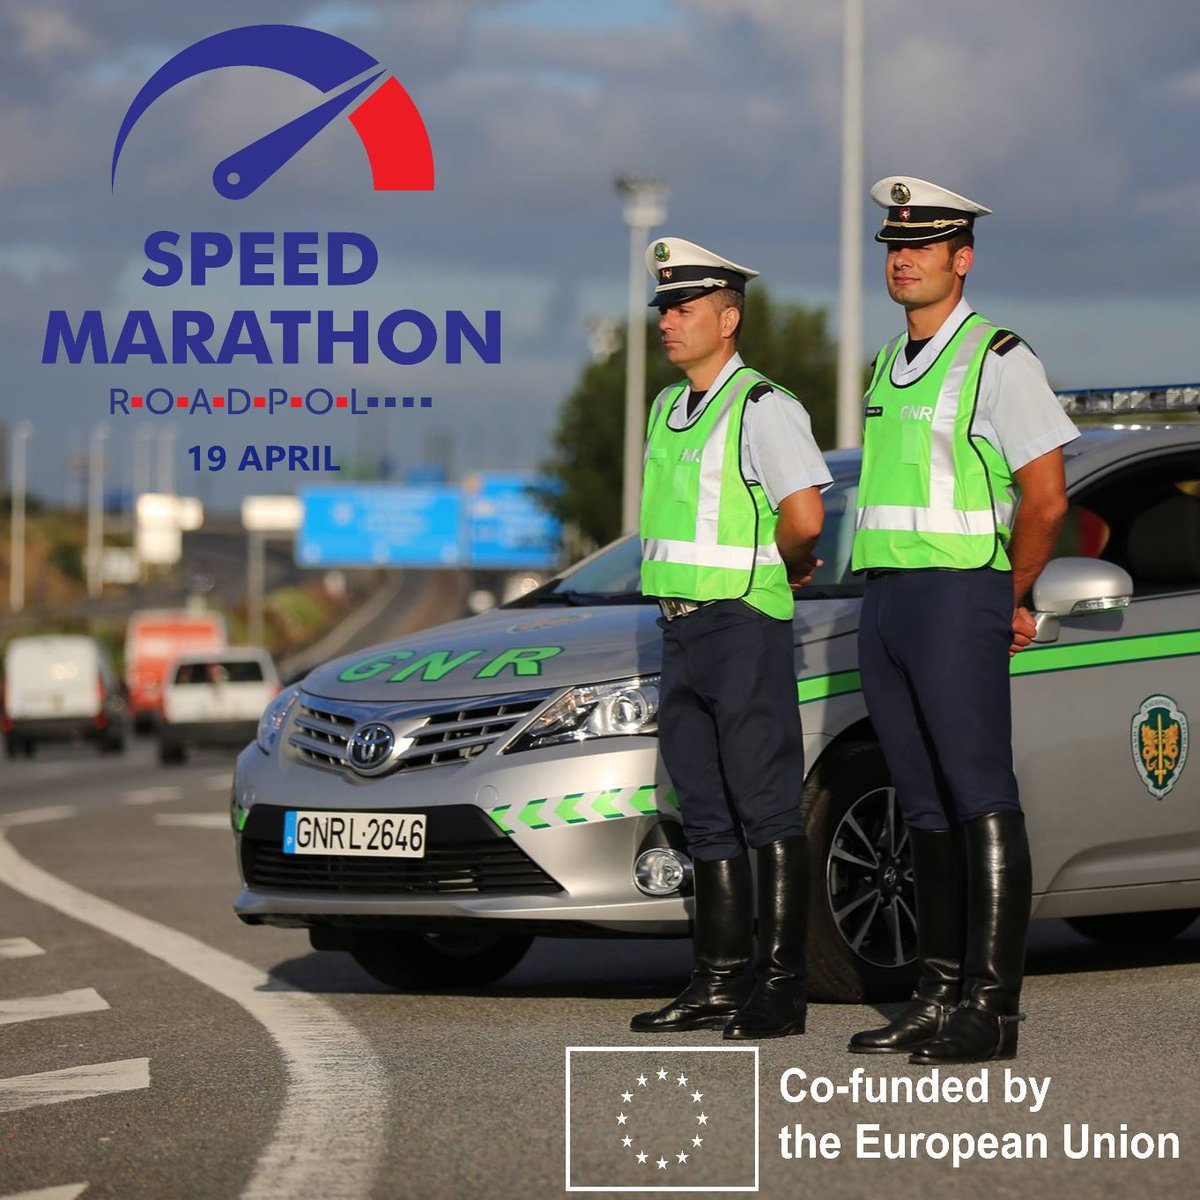 👮‍♀️ 👮‍♂️ Last year we caught 150.000 speeding drivers during the 24-hour #SpeedMarathon. 💙 We hope they are fewer this time. 🚨 Coming up next week throughout Europe! #police #roadsafety